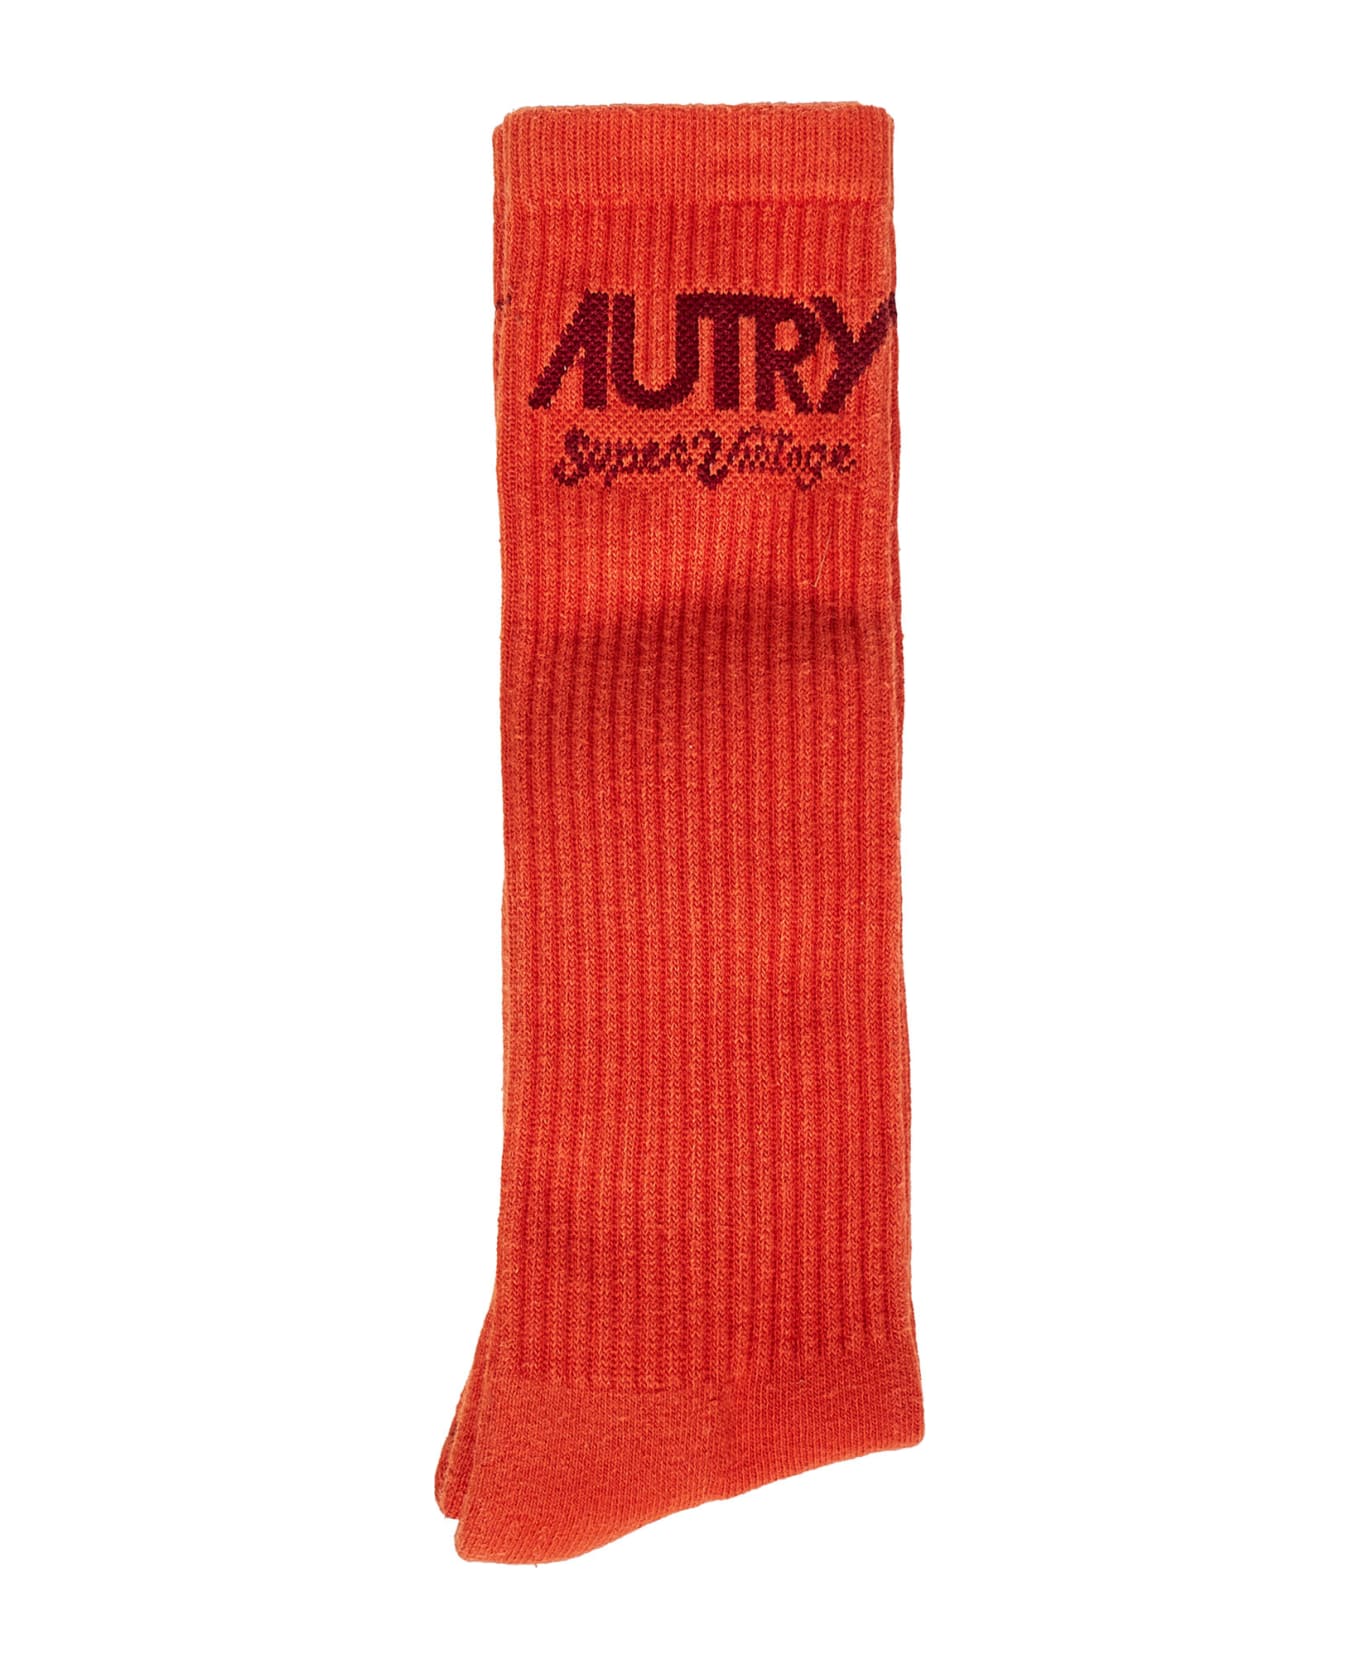 Autry Supervintage Socks - Tinto orng